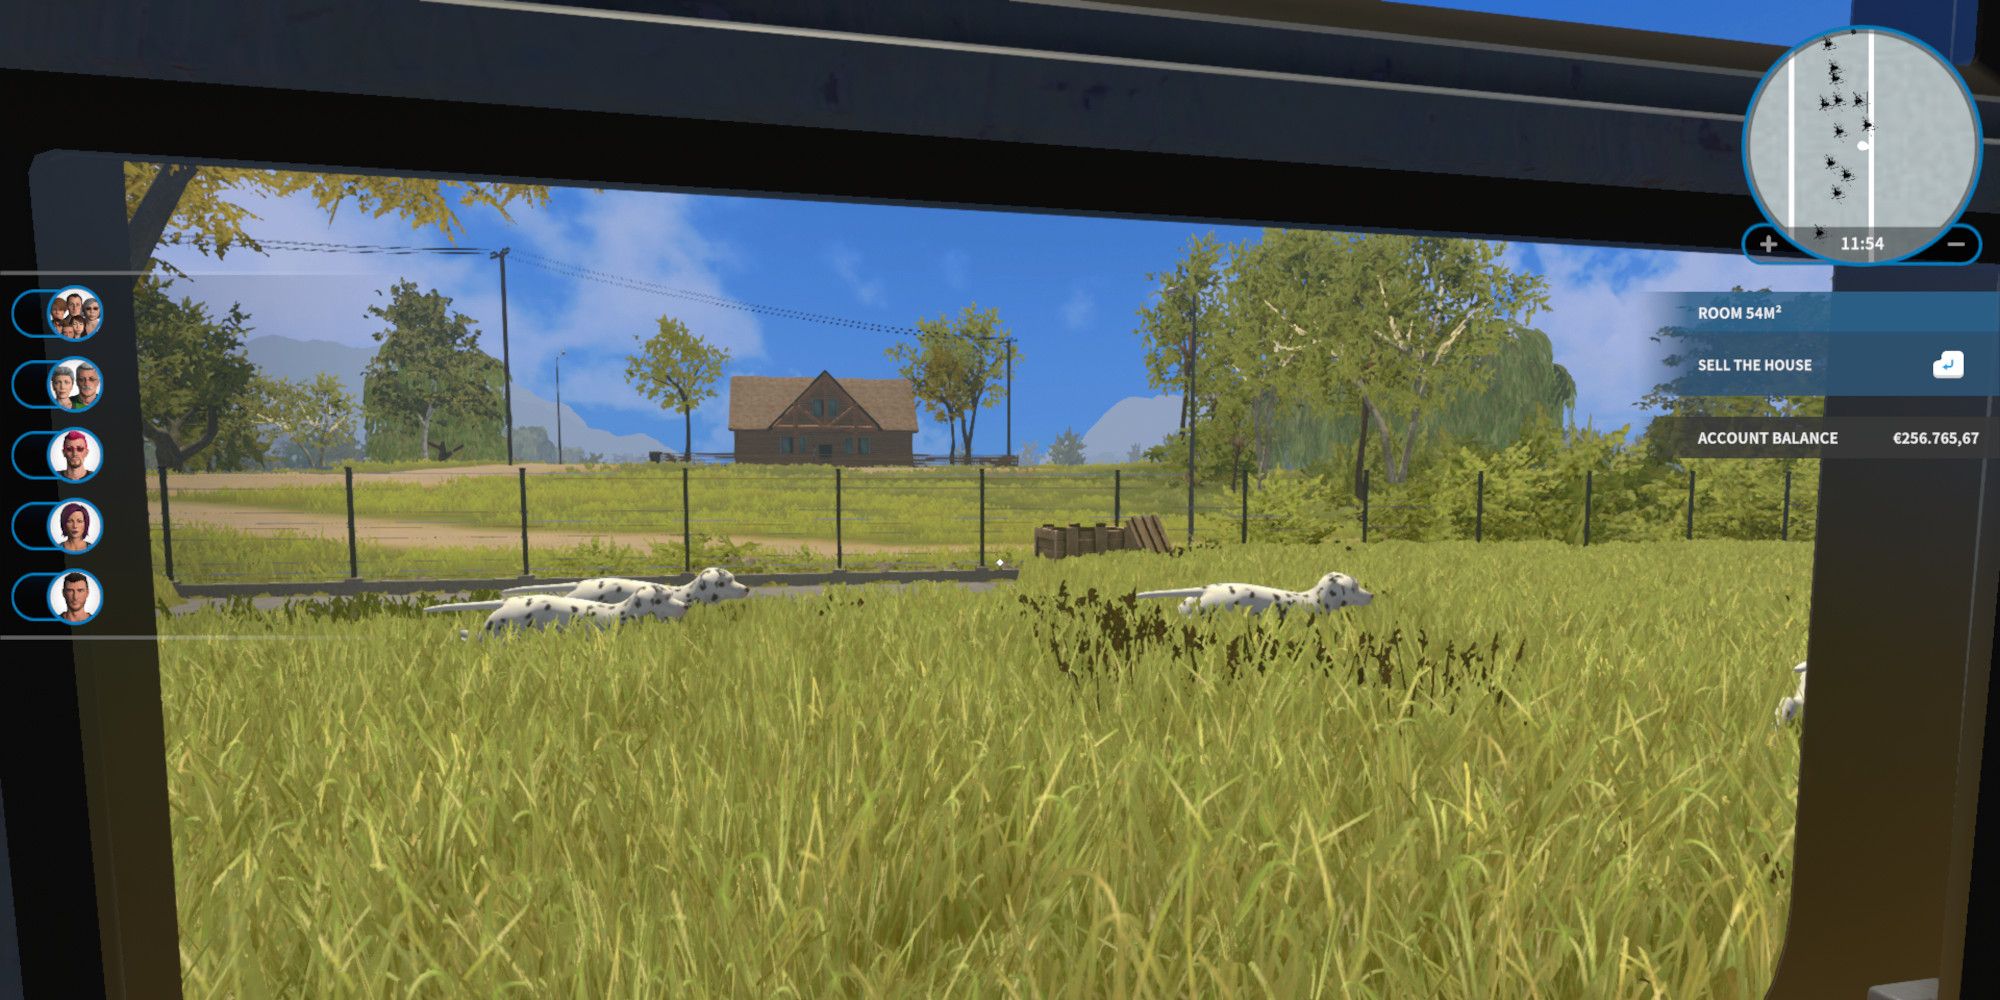 Window view of dalmations from the Pets DLC for House Flipper running around in a grassy yard